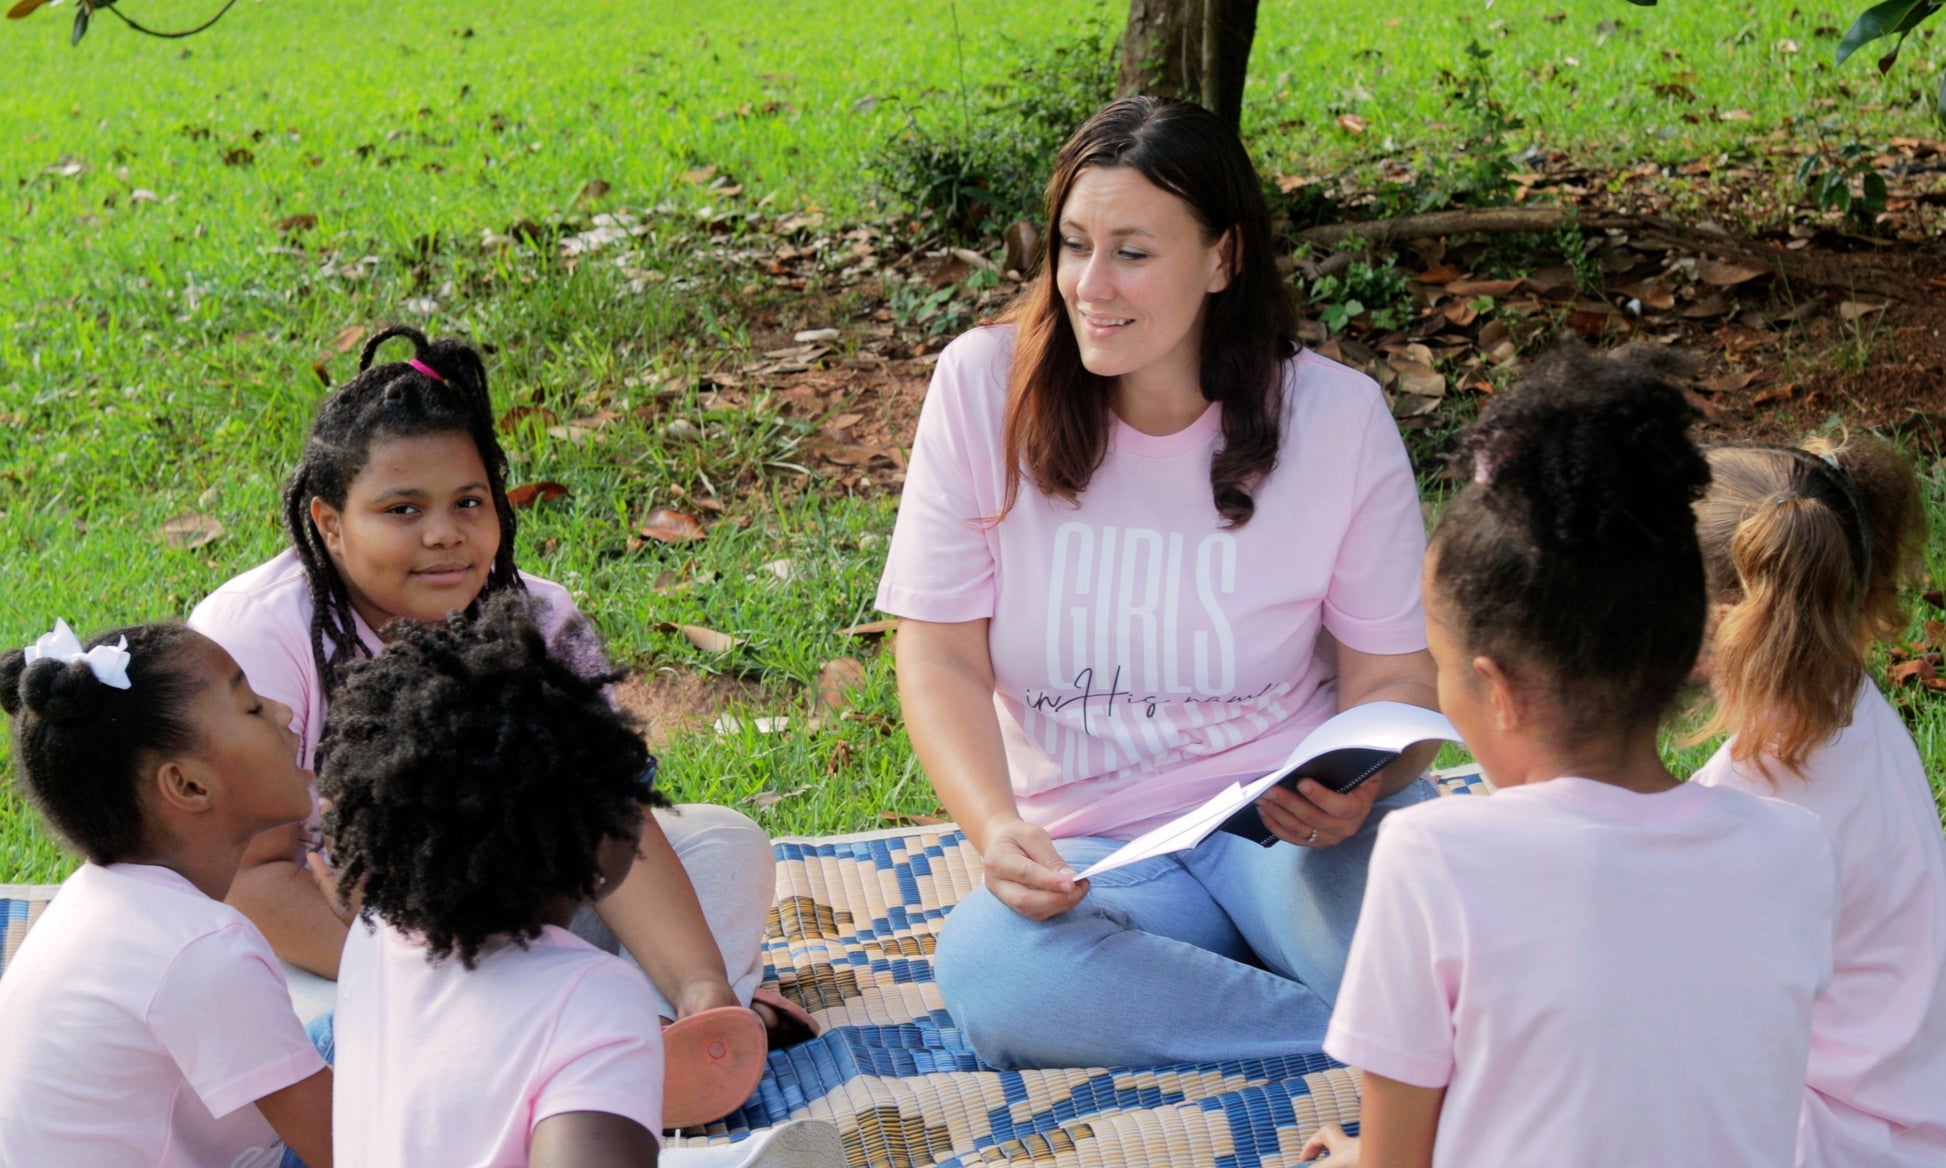 A girls small Life Group doing a Bible Study lesson outside together.